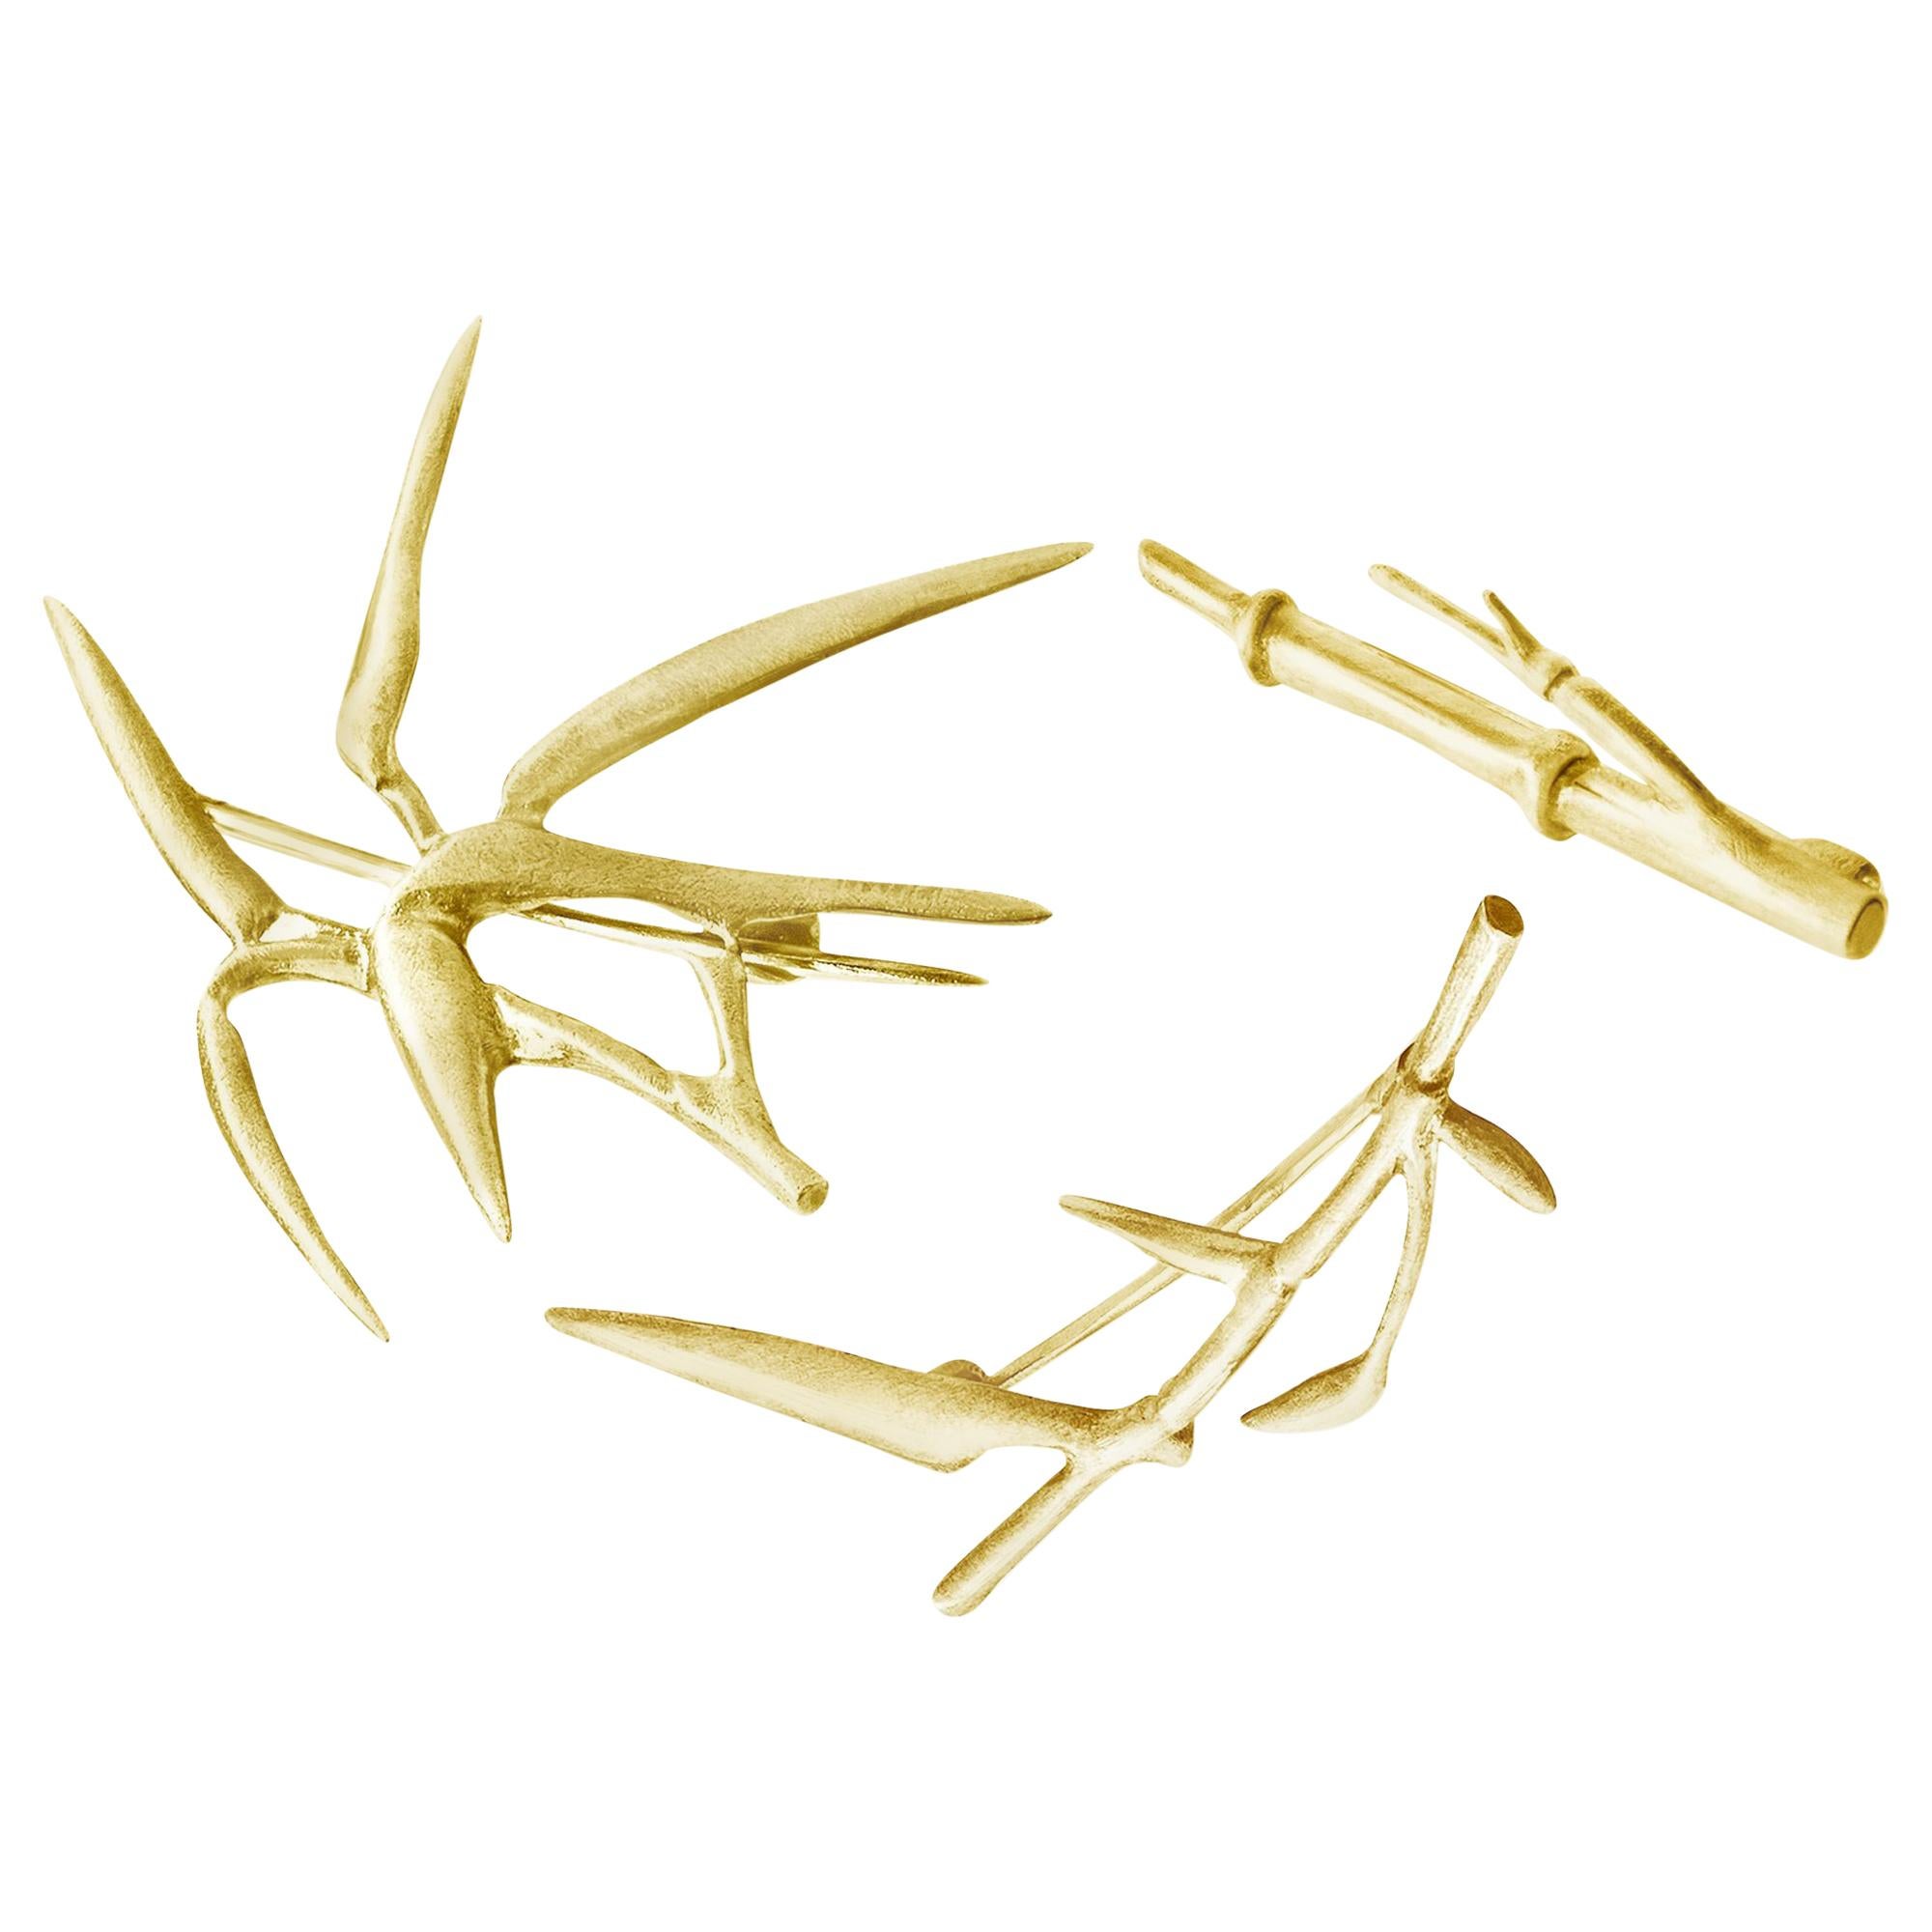 Bamboo Yellow Gold Contemporary Brooches Triptych by the Artist